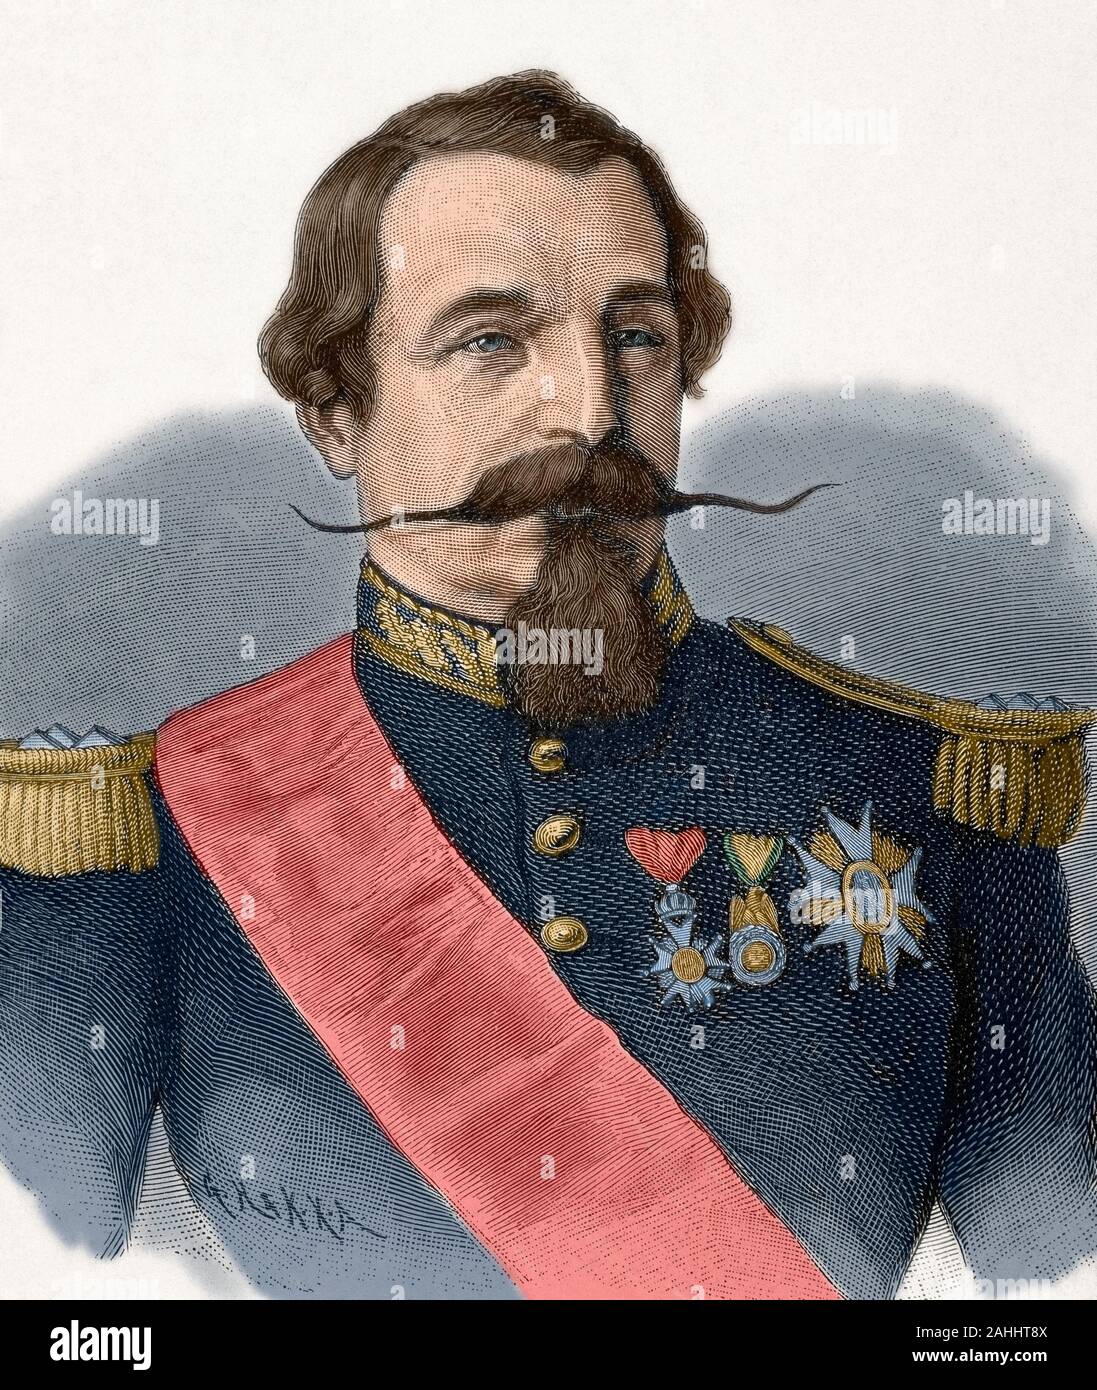 Napoleon III (Charles-Louis Napoleon Bonaparte) (Paris,1808-Chislehurst,1873). First elected president of the French Second Republic in 1848. French emperor (1852-1870) as Napoleon III. His father was Louis Bonaparte, brother of Napoleon Bonaparte. His mother was Hortense de Beauharnais. Engraving. Later colouration. Stock Photo